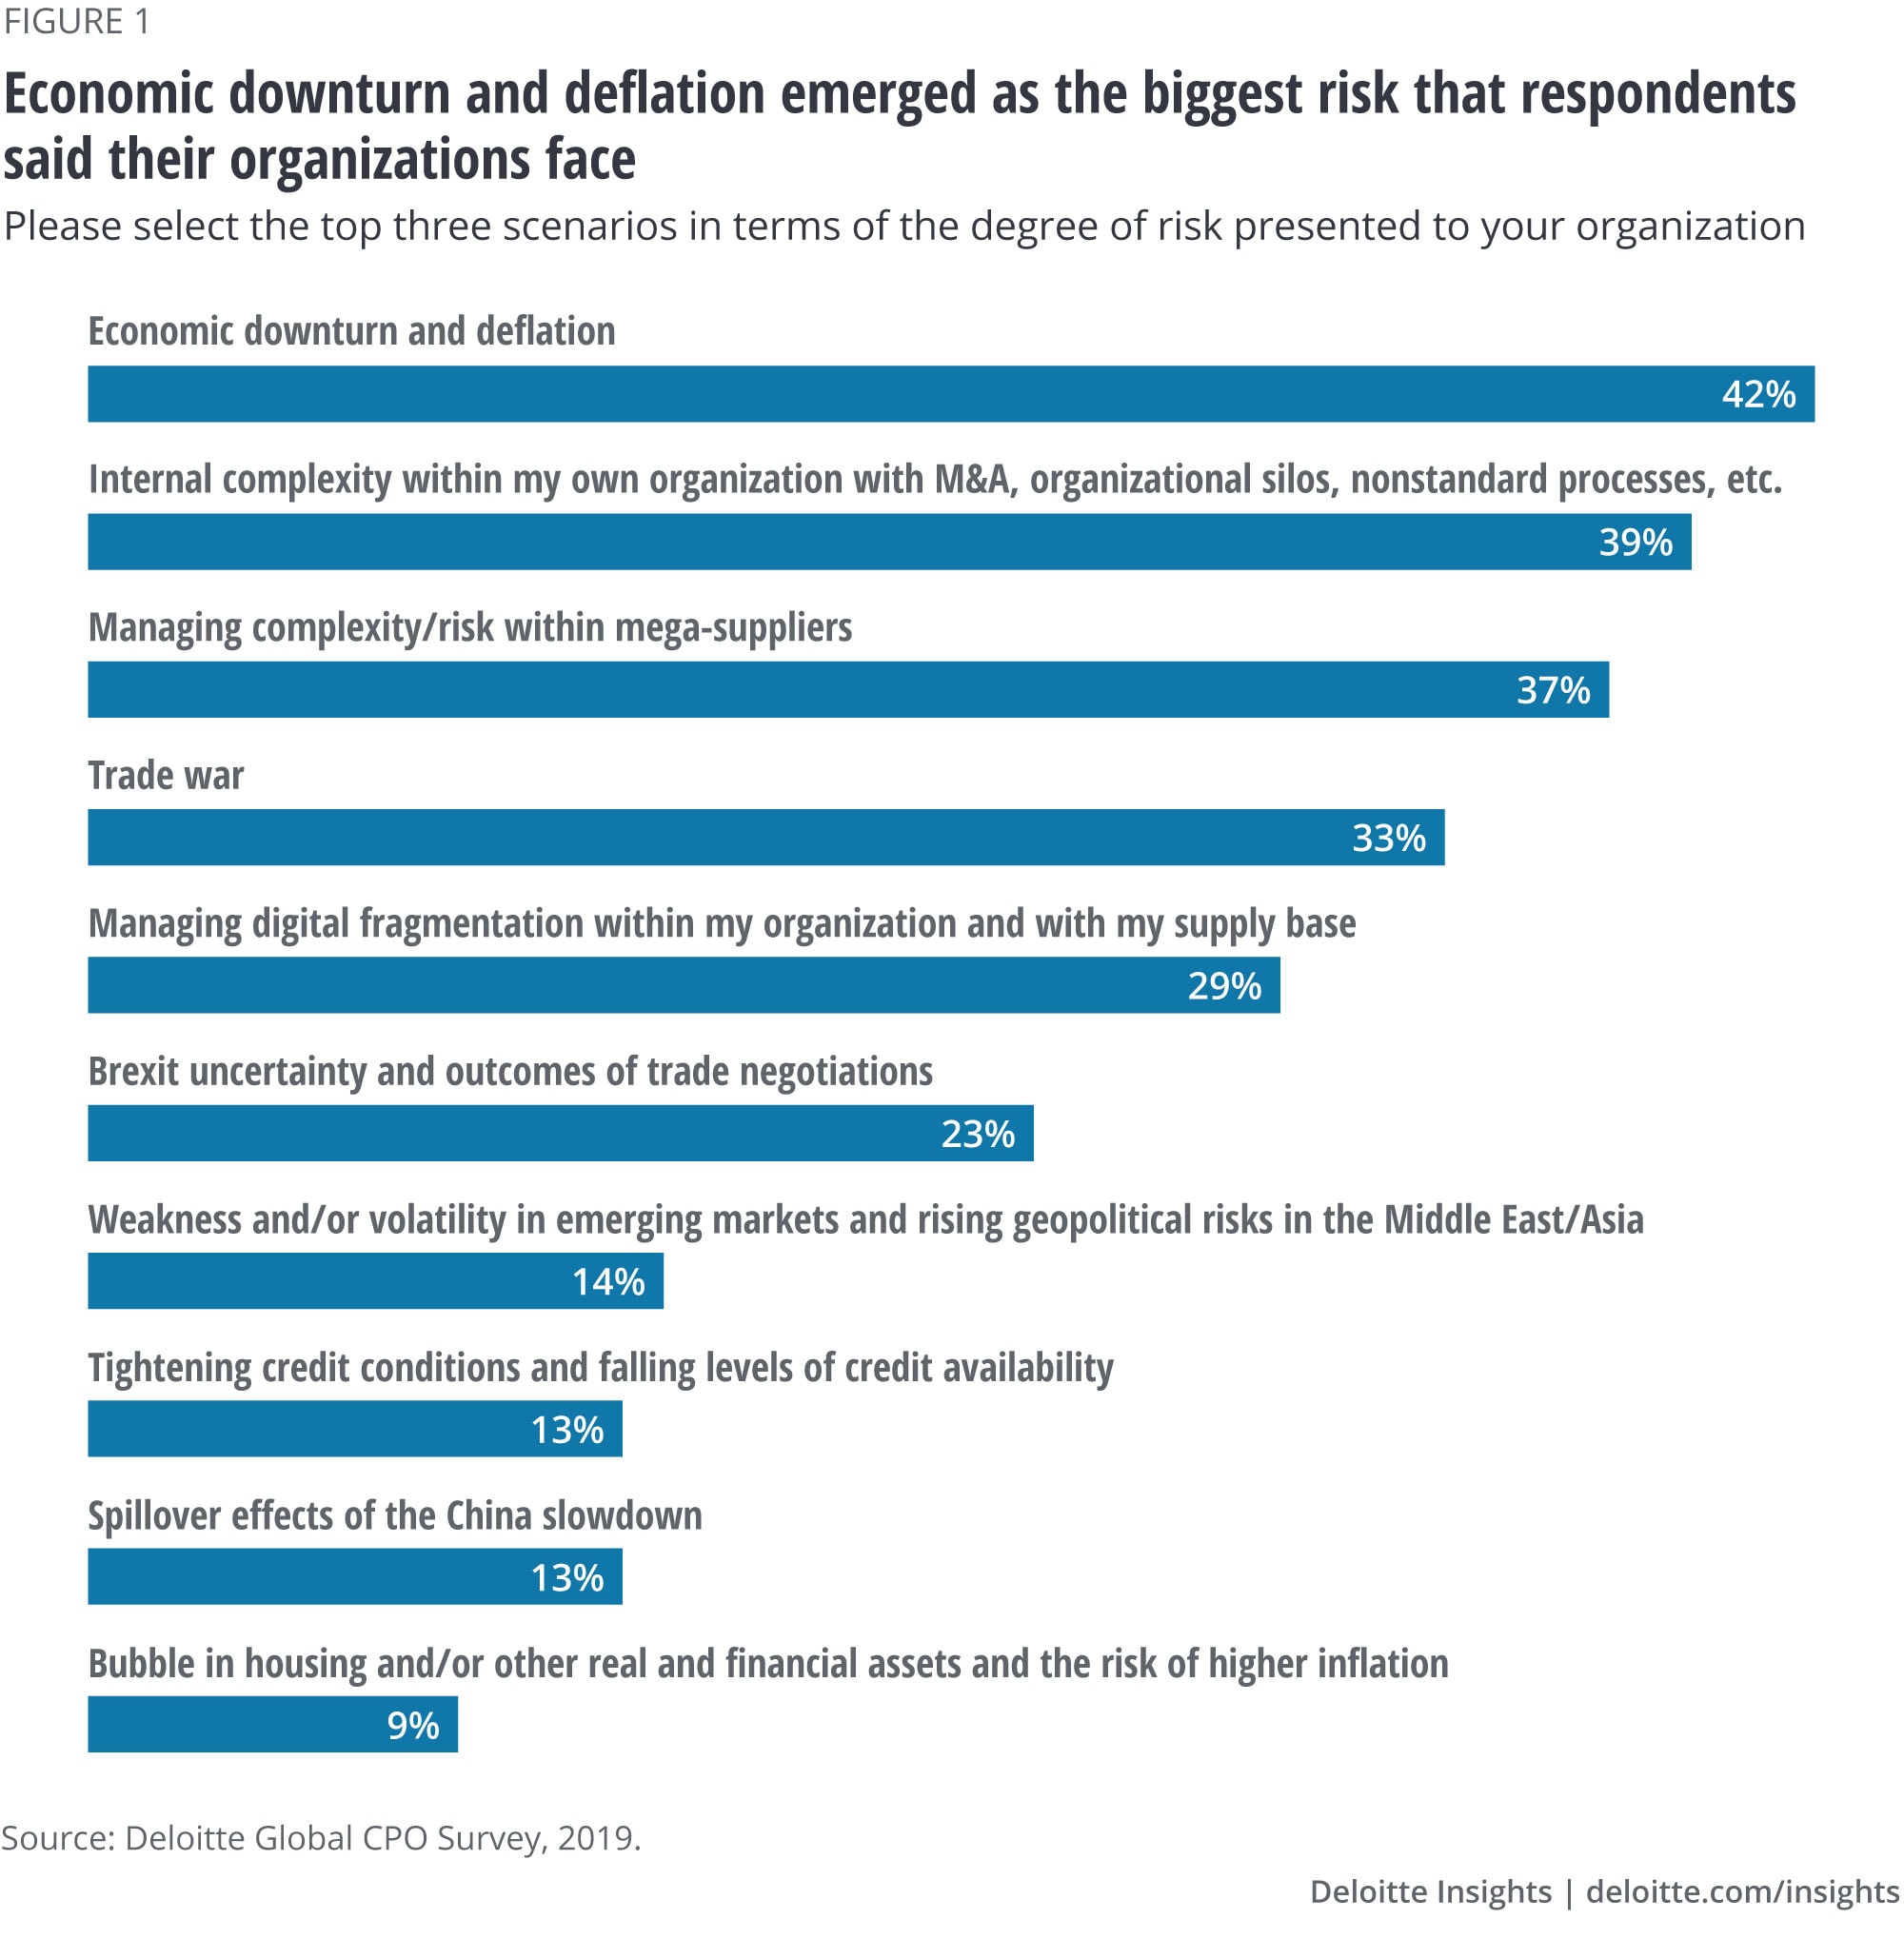 Economic downturn and deflation emerged as the biggest risk that respondents said their organizations face